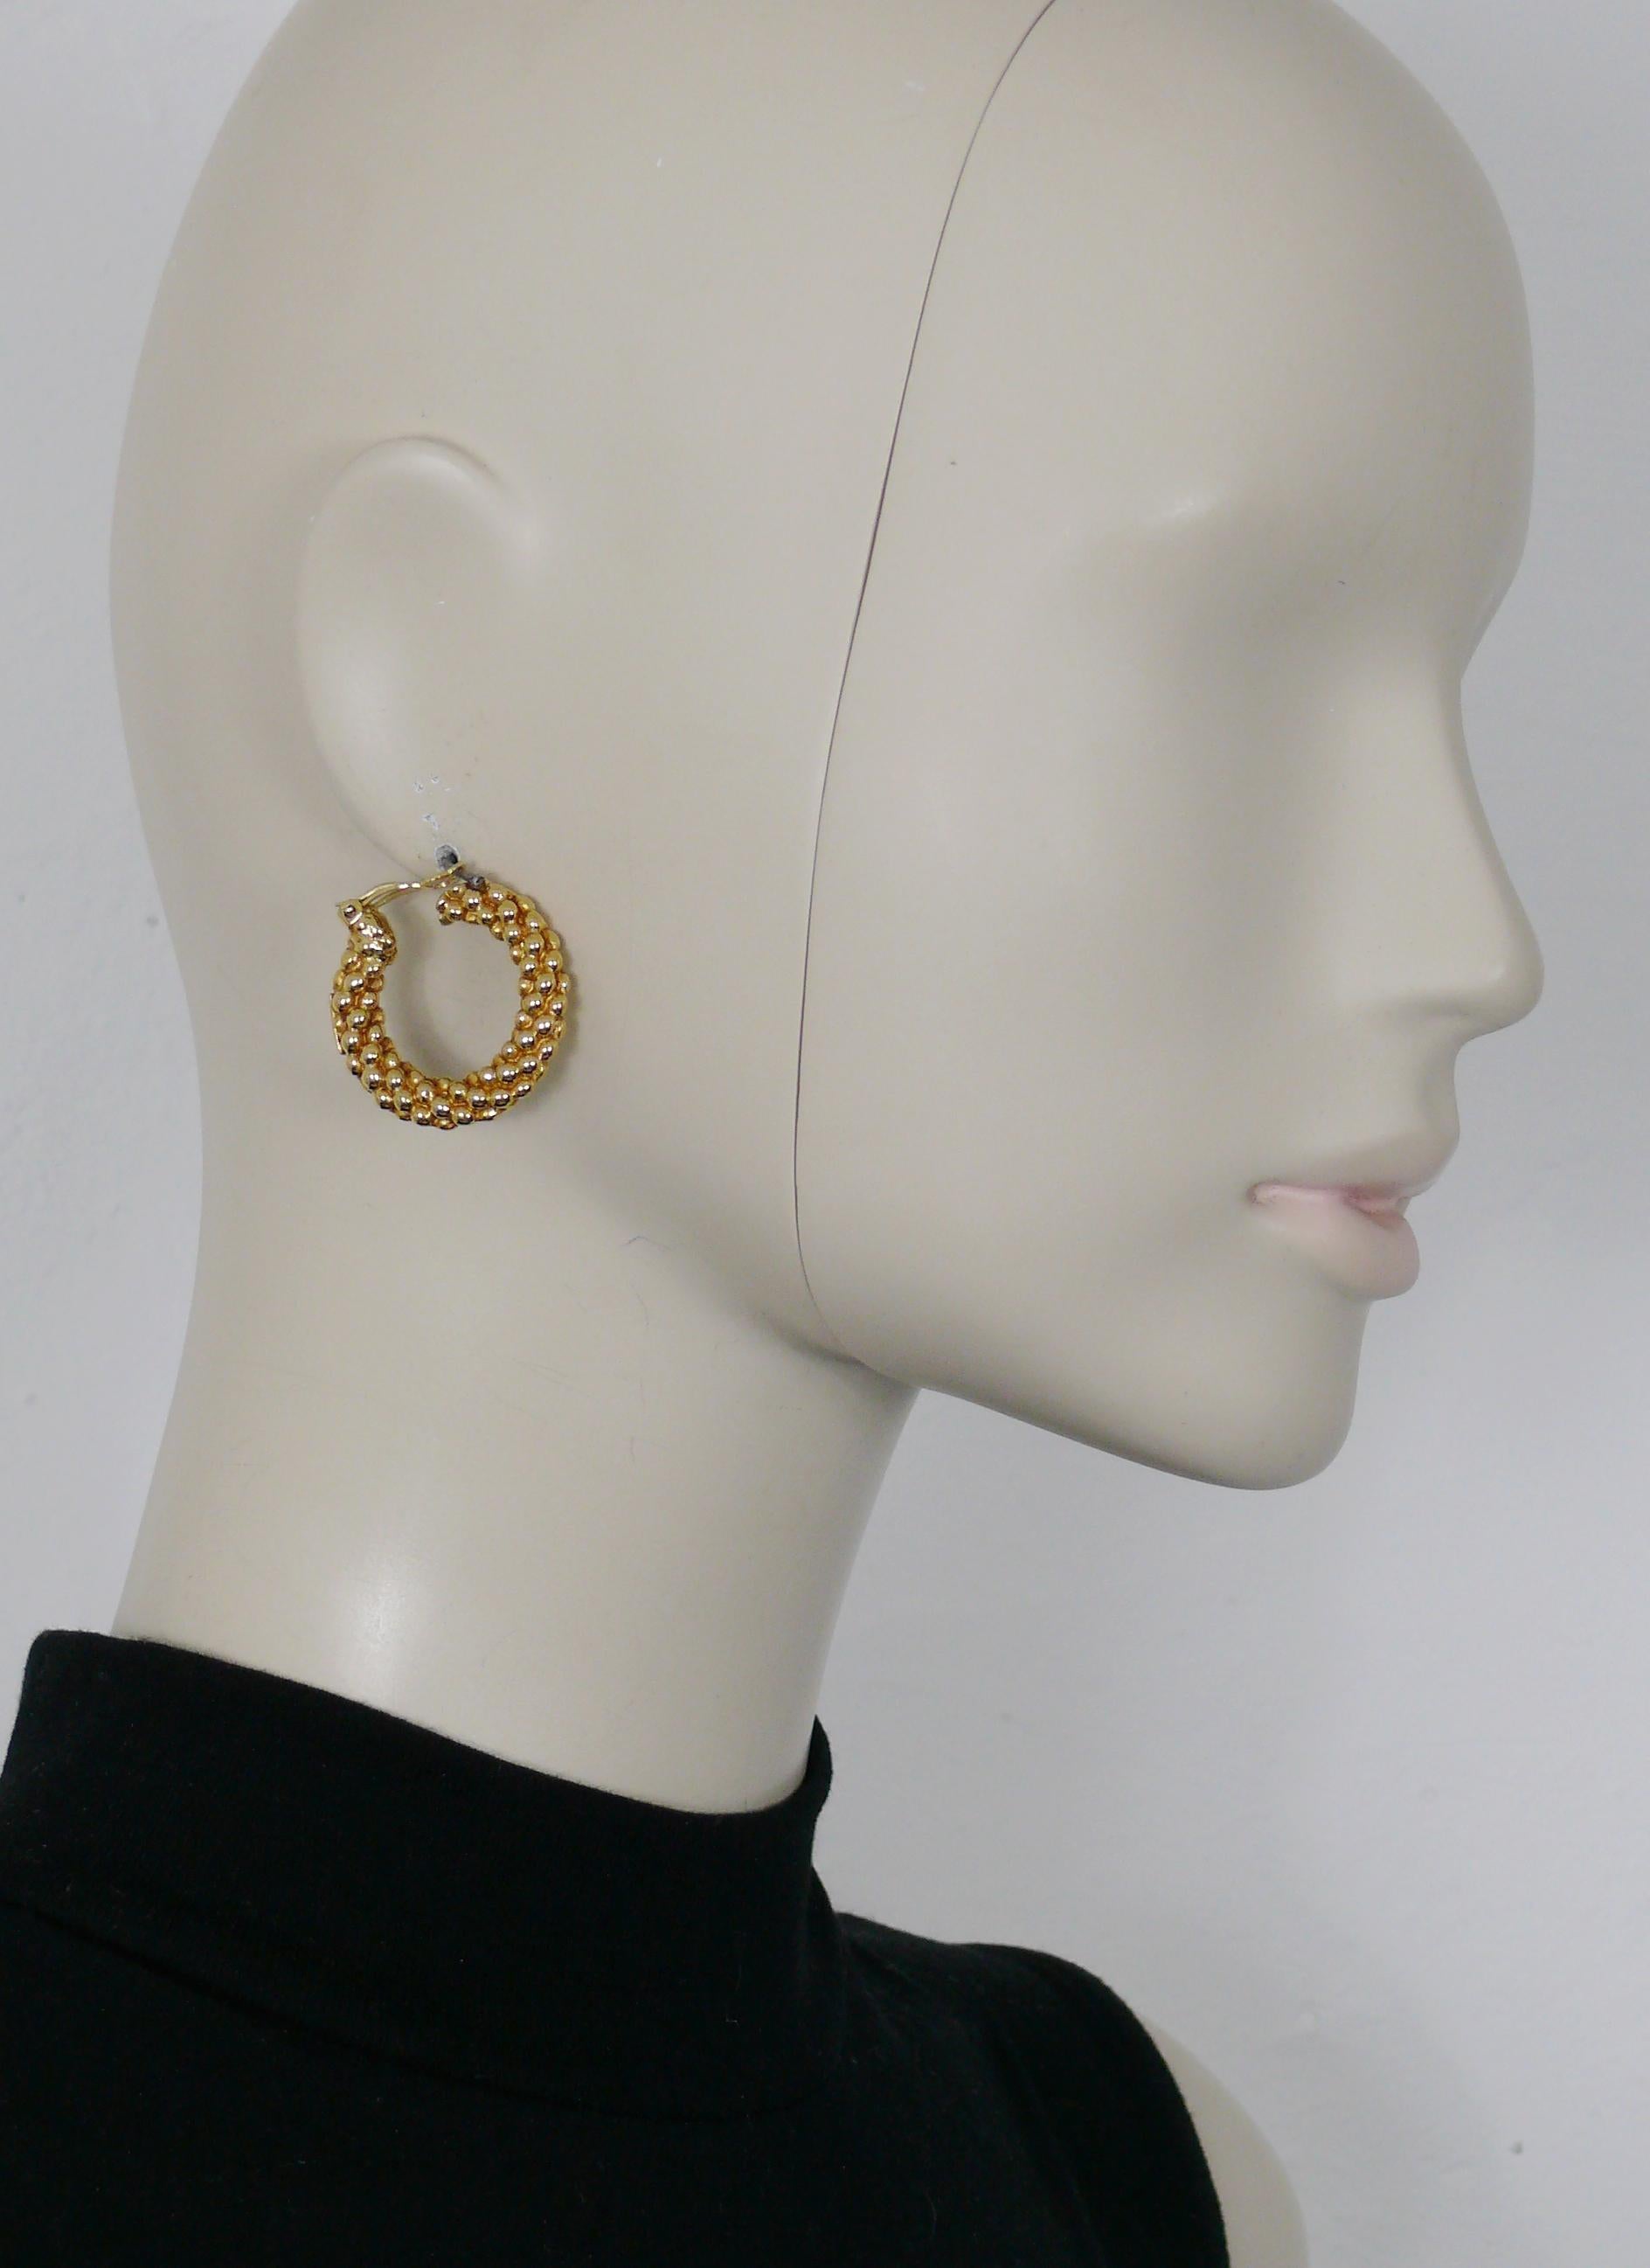 YVES SAINT LAURENT vintage gold toned textured hoop earrings (clip-on).

Embossed YSL Made in France.

Indicative measurements : diameter approx. 3 cm (1.18 inches).

JEWELRY CONDITION CHART
- New or never worn : item is in pristine condition with